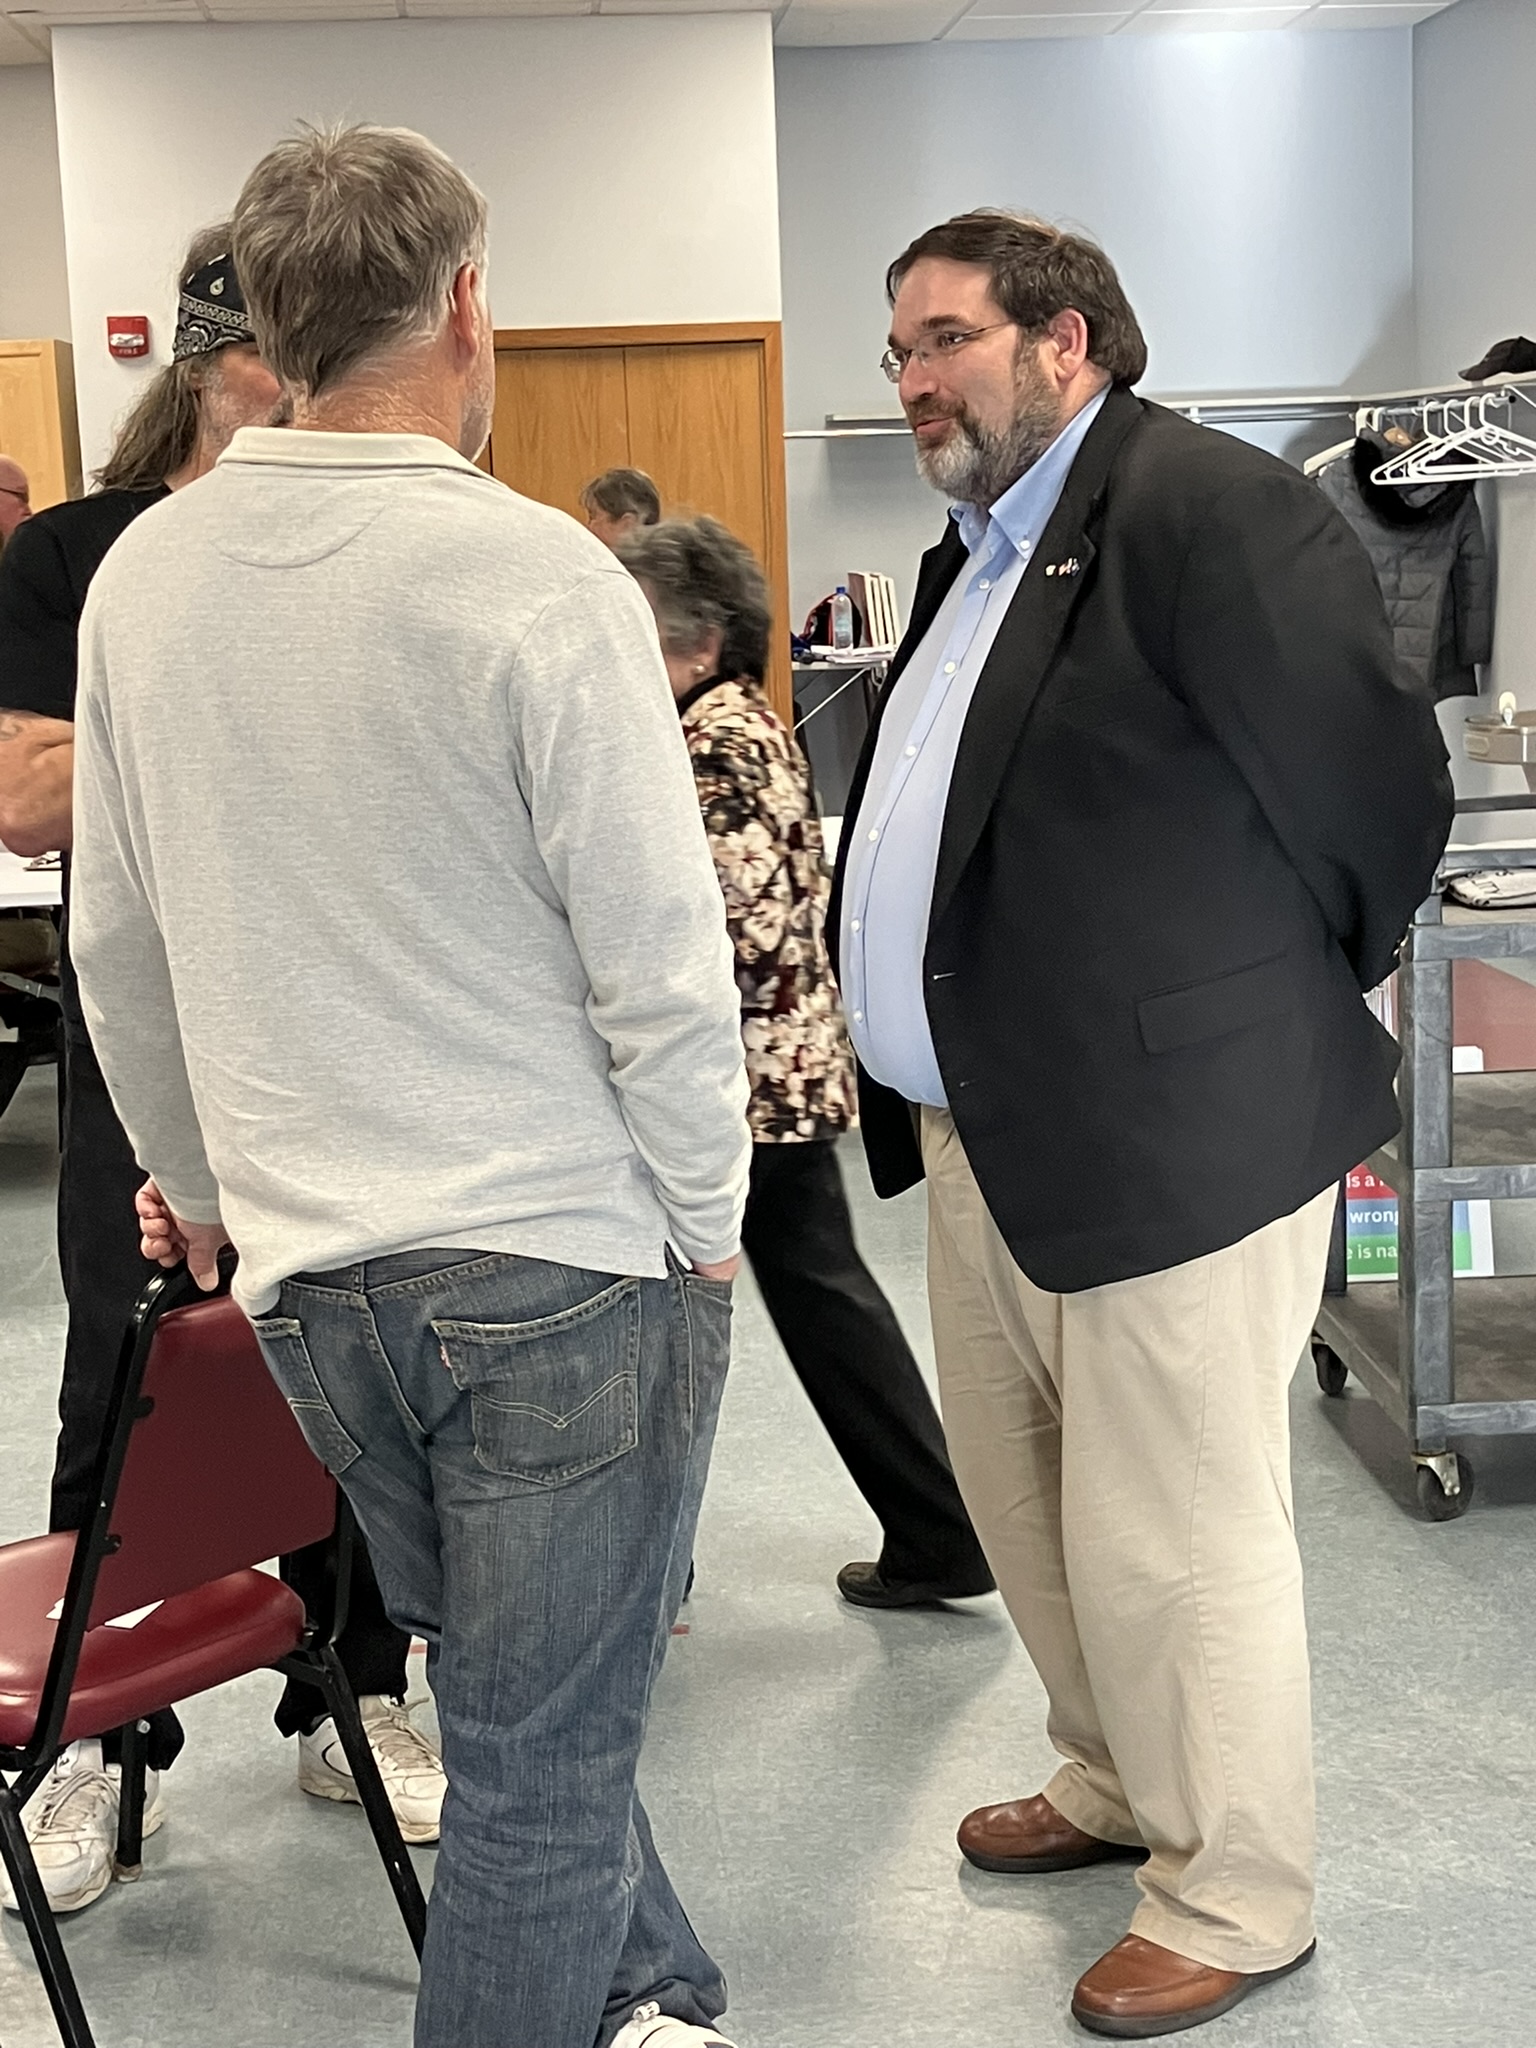 Wisconsin State Sen. Andre Jacque, a candidate to represent the state's 8th Congressional District, spoke to Wolf River Area Patriots on April 23, 2024.